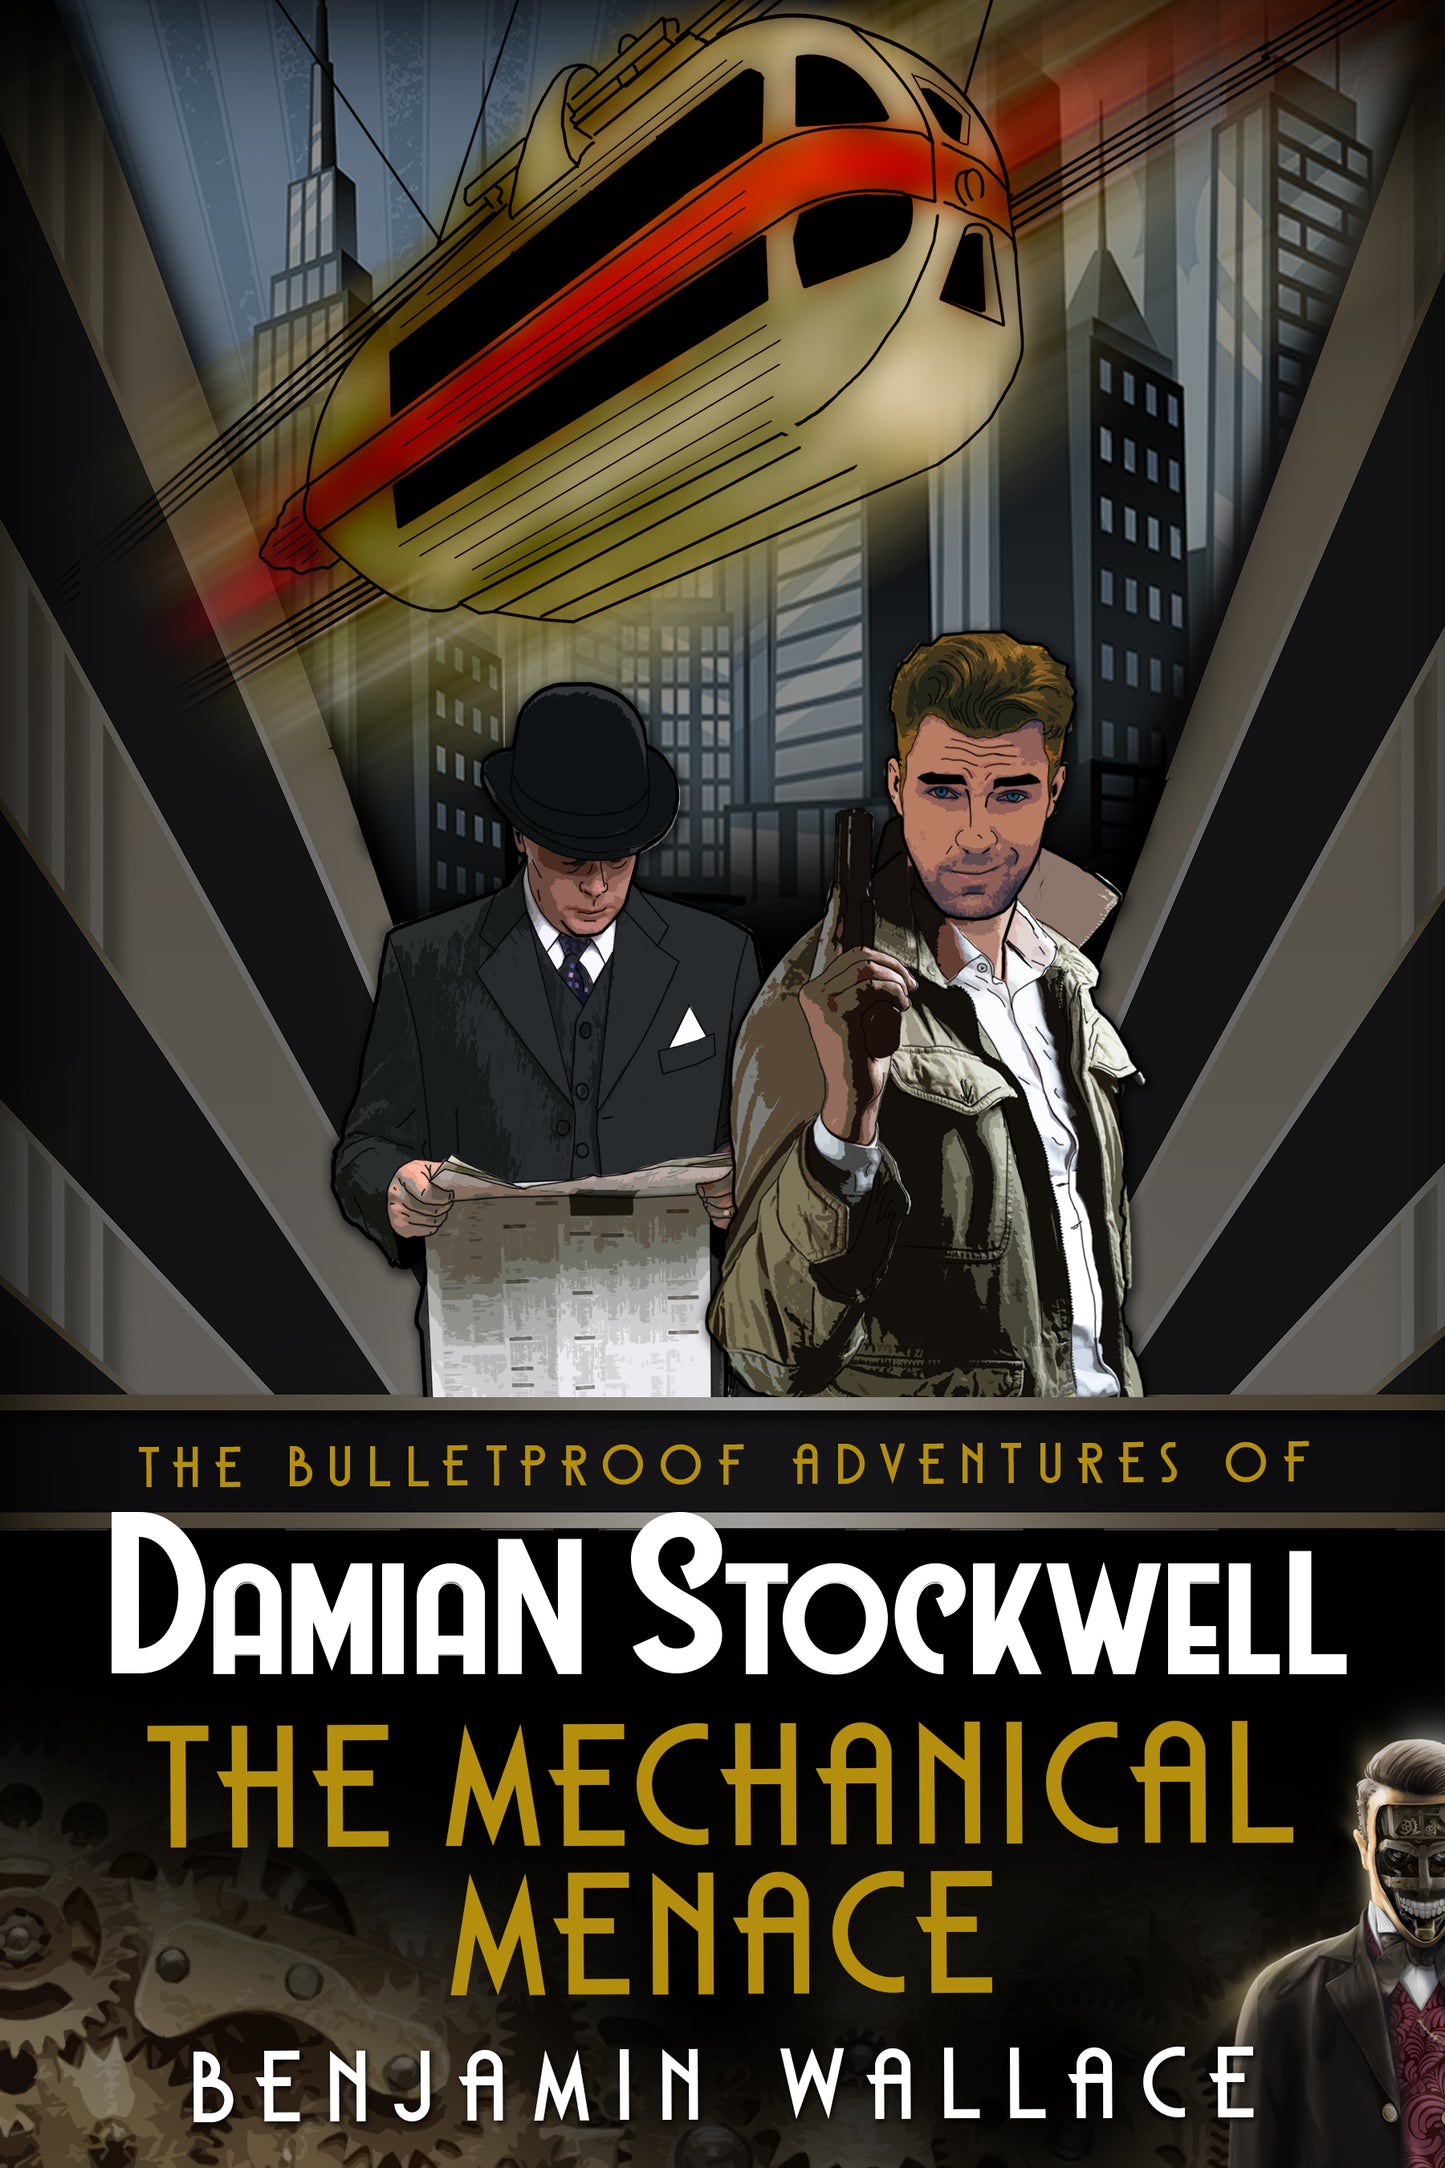 The Mechanical Menace - The Bulletproof Adventures of Damian Stockwell, Book 3 (Kindle and ePub)